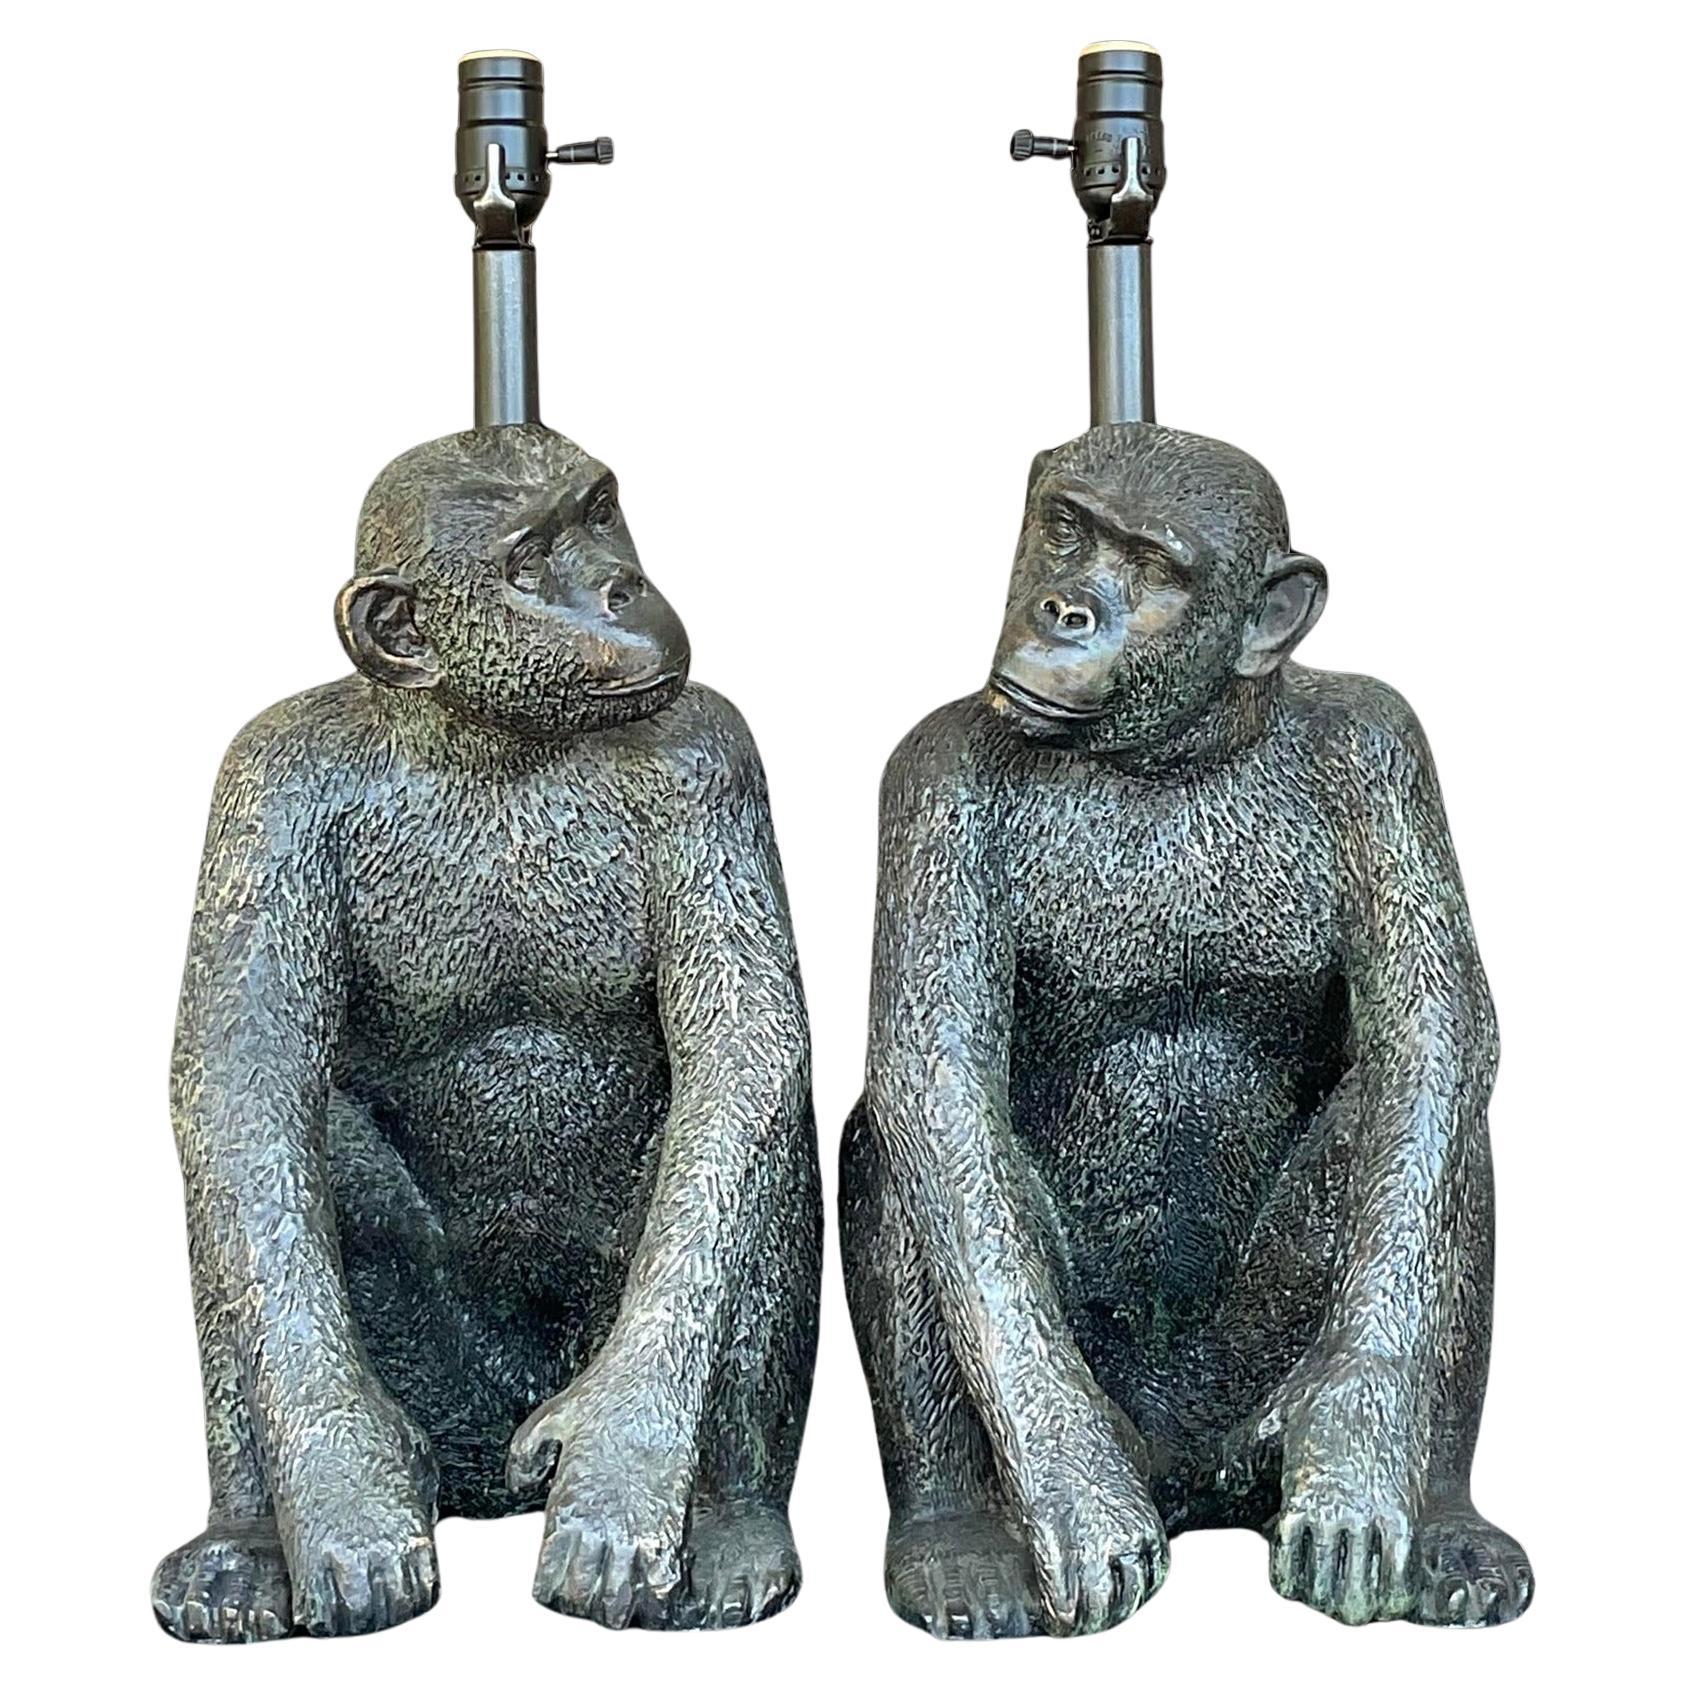 Vintage Boho Patinated Monkey Table Lamps - a Pair